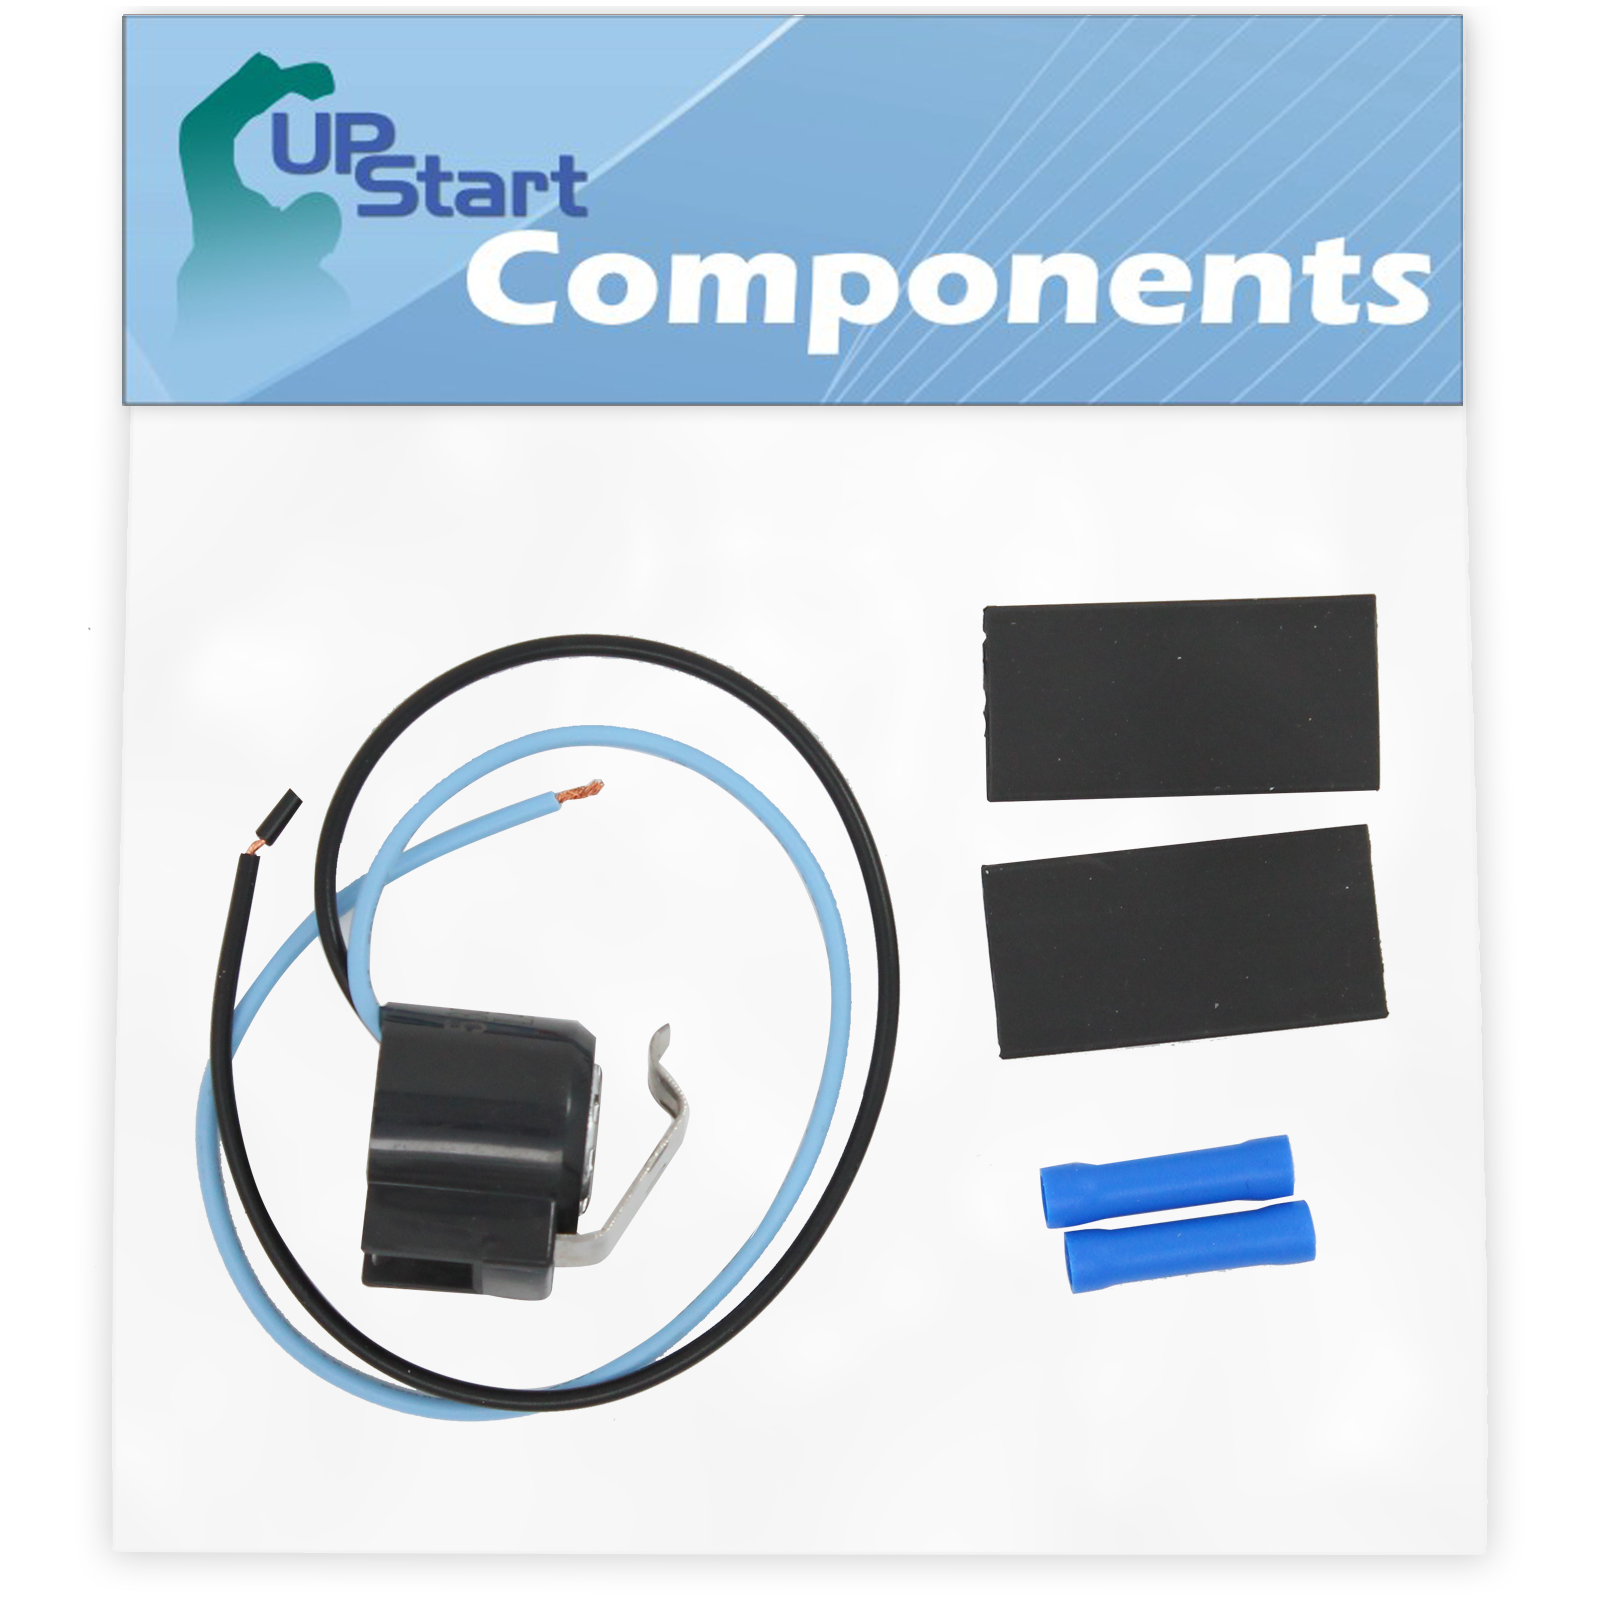 5303918214 Defrost Thermostat Replacement for Frigidaire GLRS267ZDQ5 Refrigerator - Compatible with 5303918214 Defrost Thermostat Kit - UpStart Components Brand - image 1 of 2